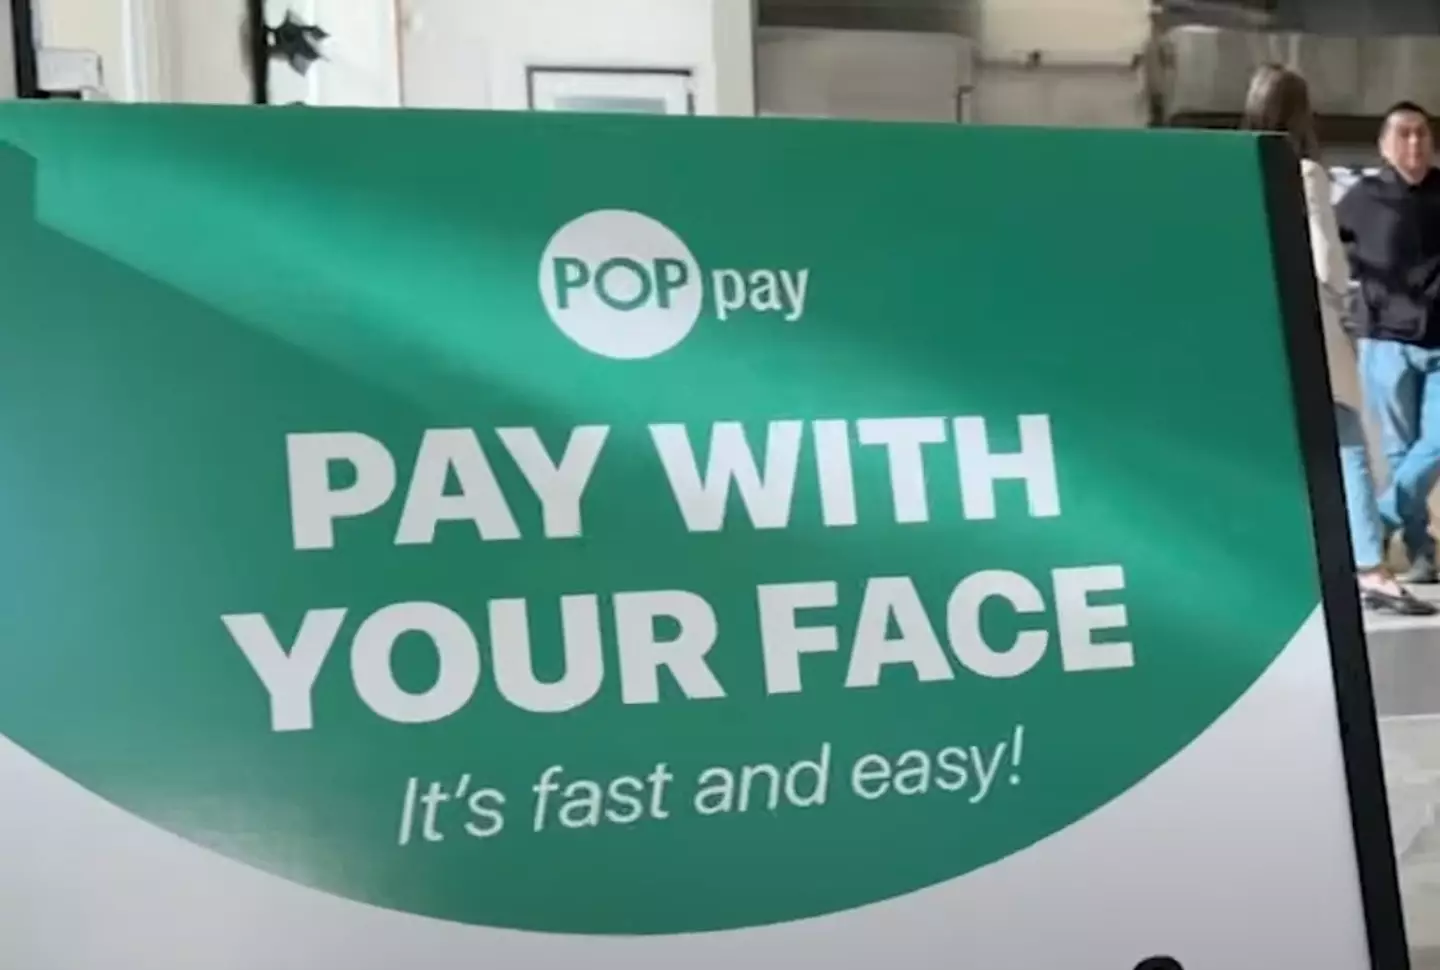 Oh and you can also pay for your food 'with your face'.